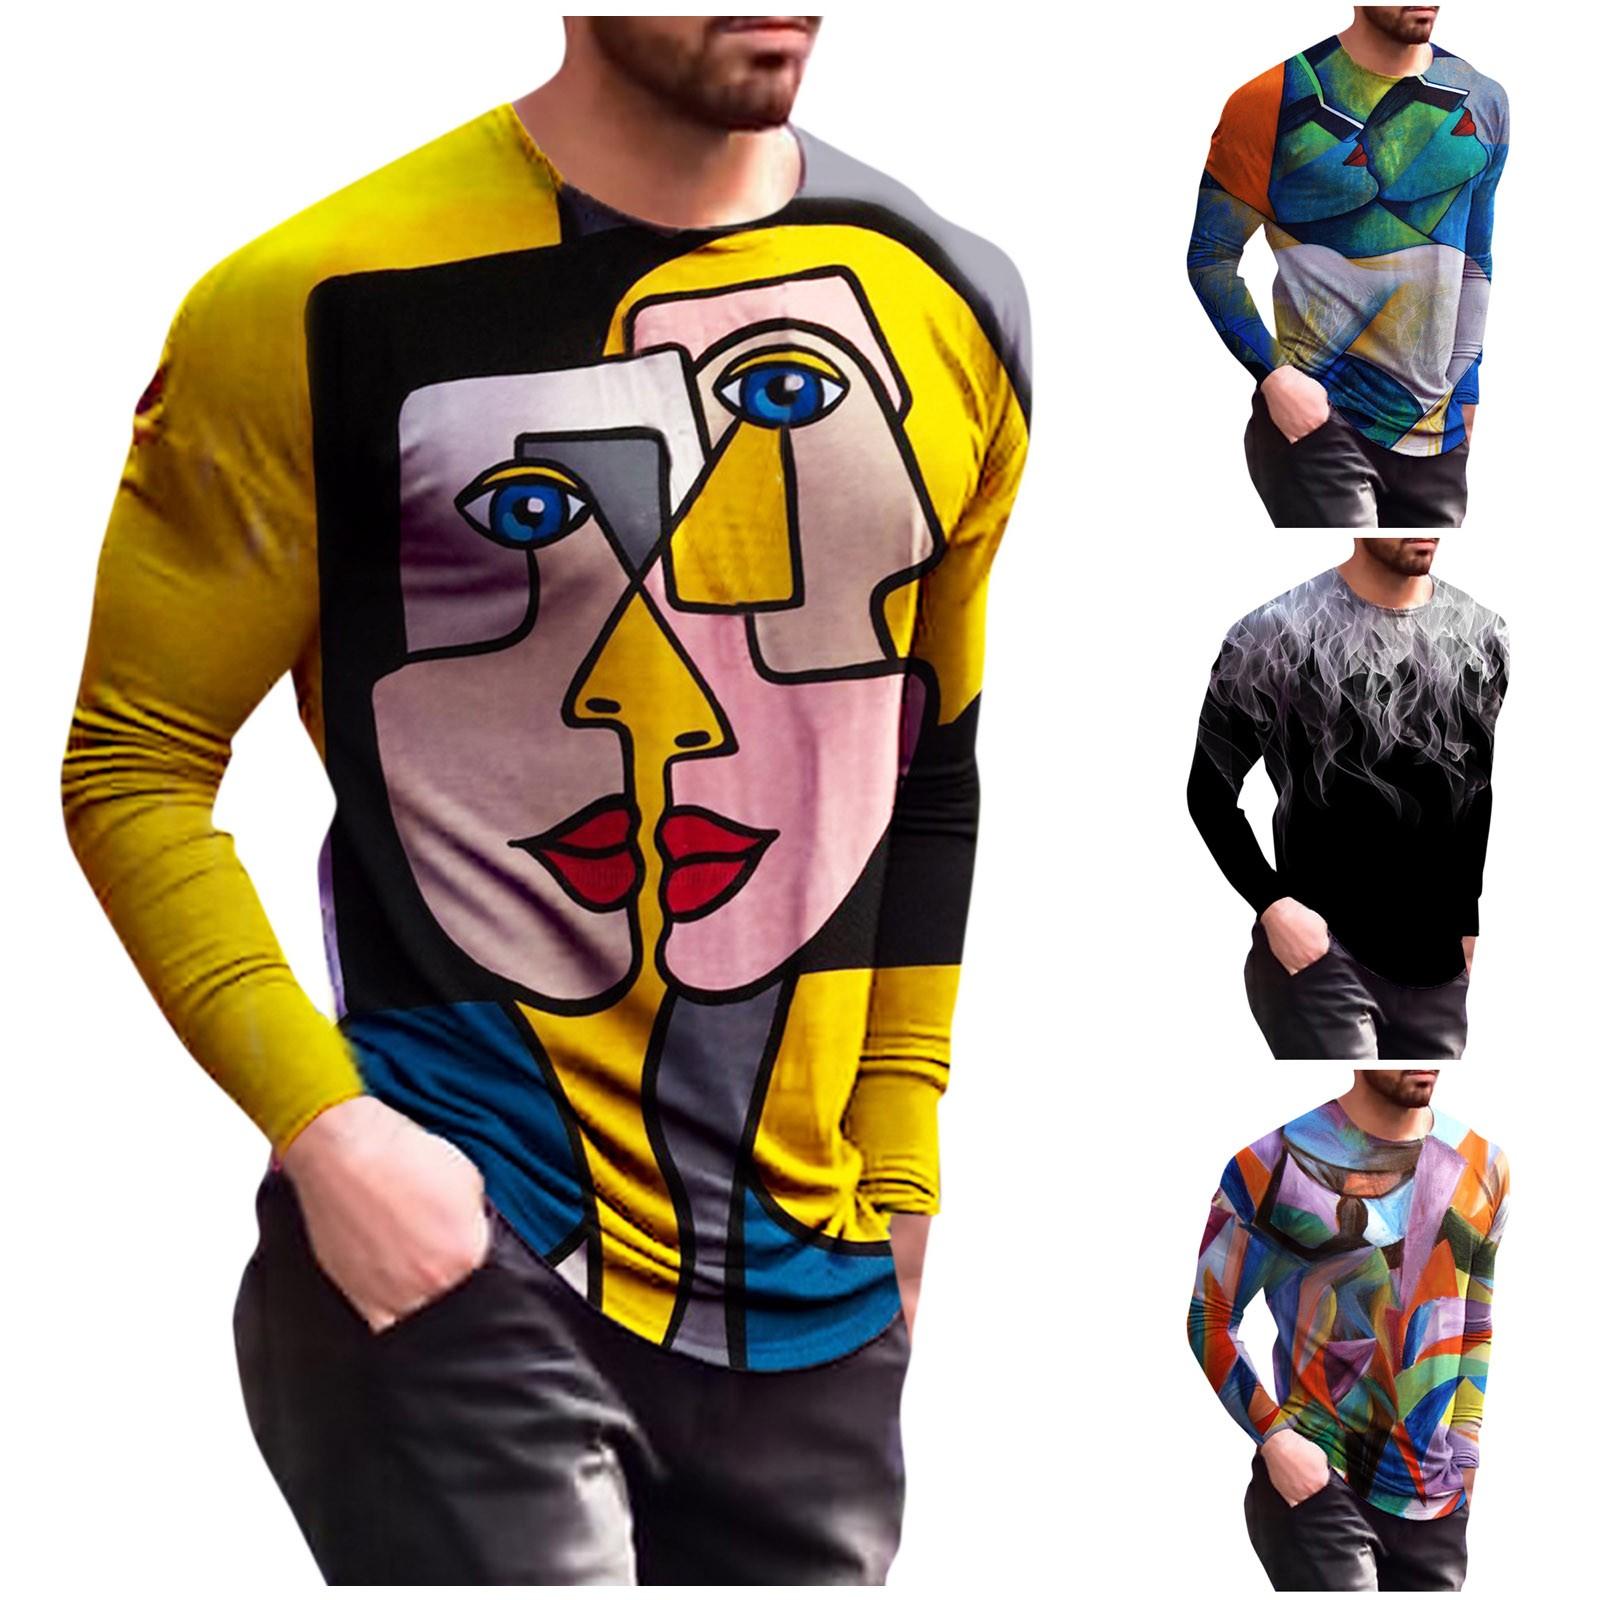 WhyMe Men's Fashion Casual Printed Long Sleeve O-Neck Shirts Tops Blouse